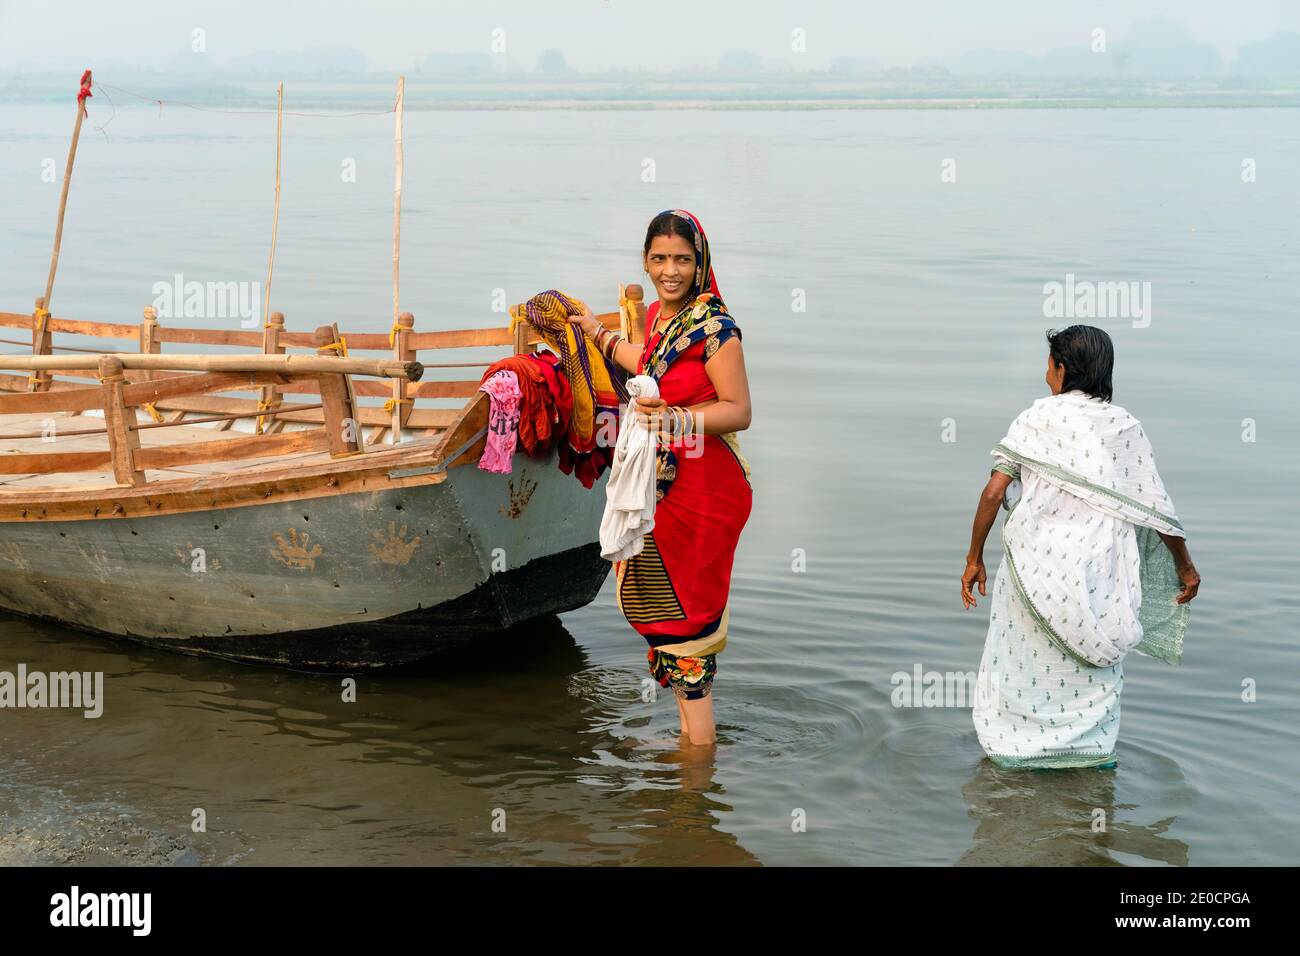 Hindu women devotees in traditional clothes wash laundry in holy river at sunrise in Vrindavan, Uttar Pradesh, India. Stock Photo